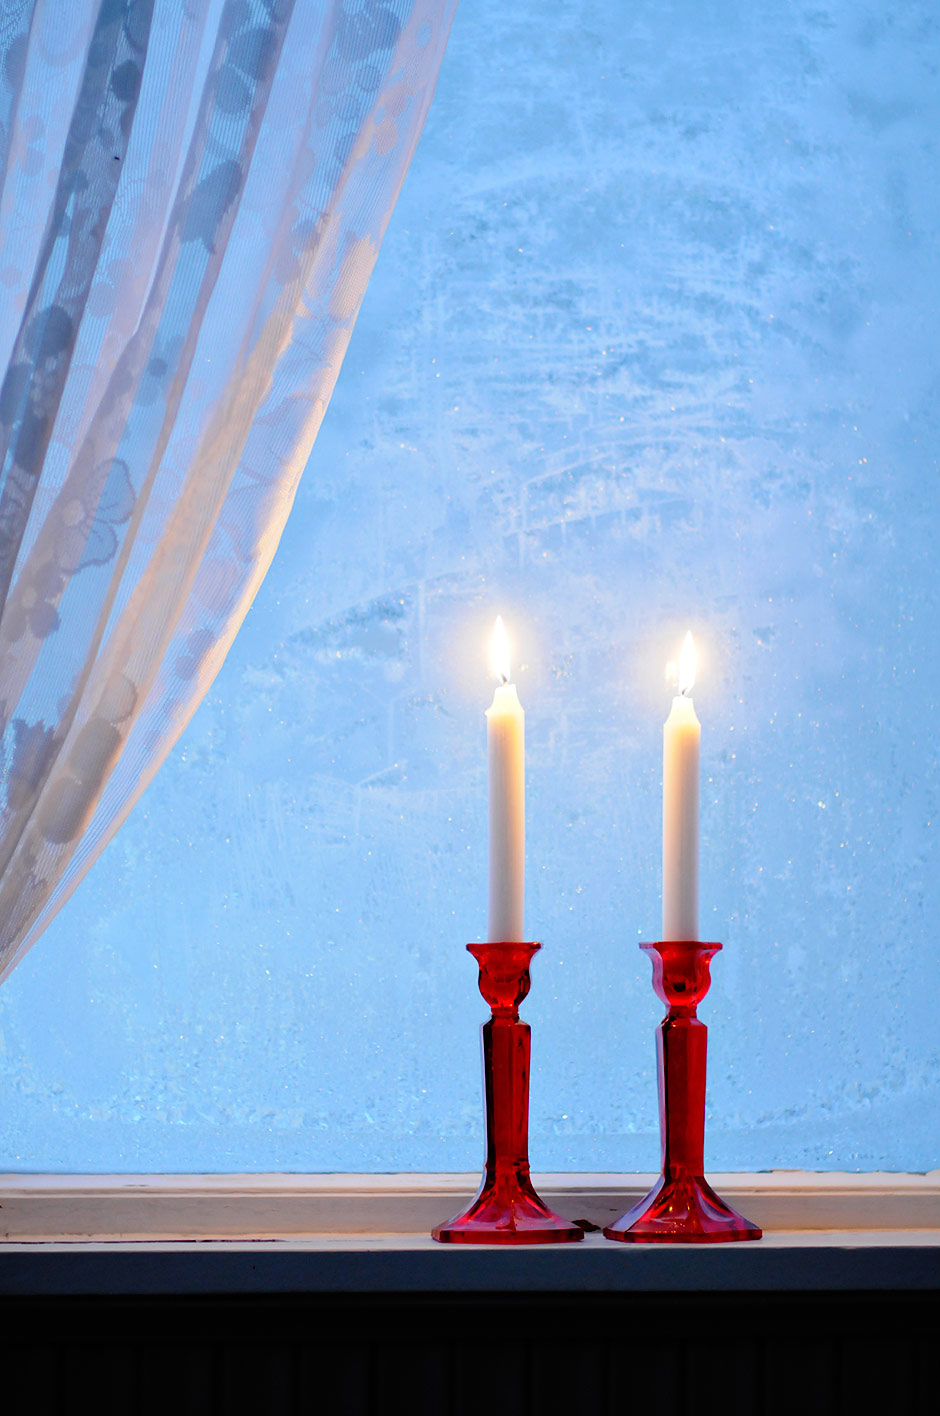 Candle light in winter night